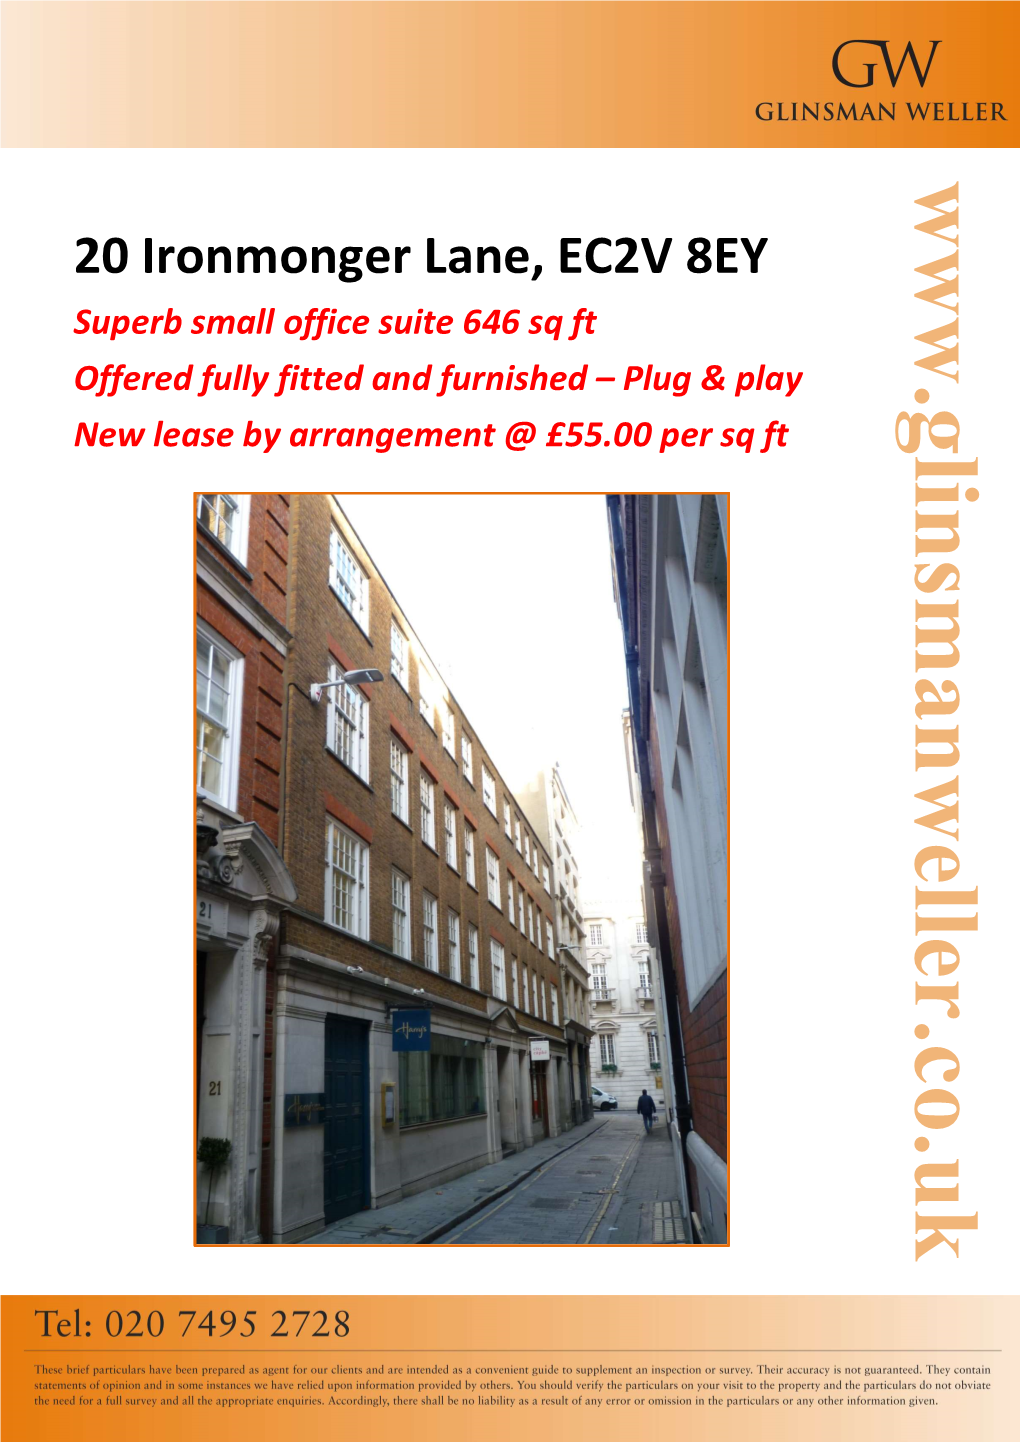 20 Ironmonger Lane, EC2V 8EY Superb Small Office Suite 646 Sq Ft Offered Fully Fitted and Furnished – Plug & Play New Lease by Arrangement @ £55.00 Per Sq Ft